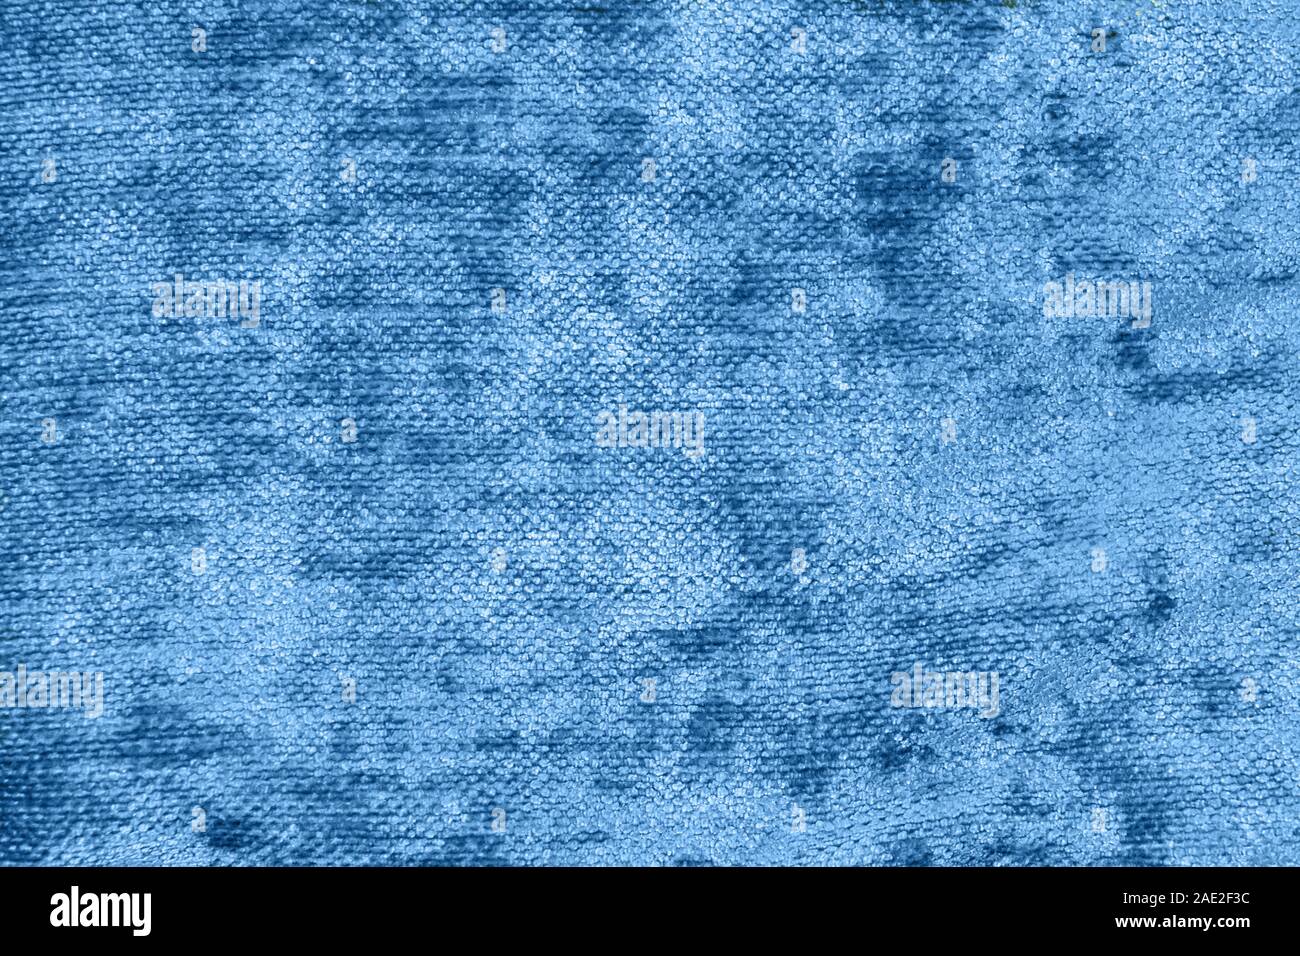 Upholstery blue fabric texture. Trendy color of the year 2020. Abstract material pattern for furniture. Grunge virid textile background. Stock Photo